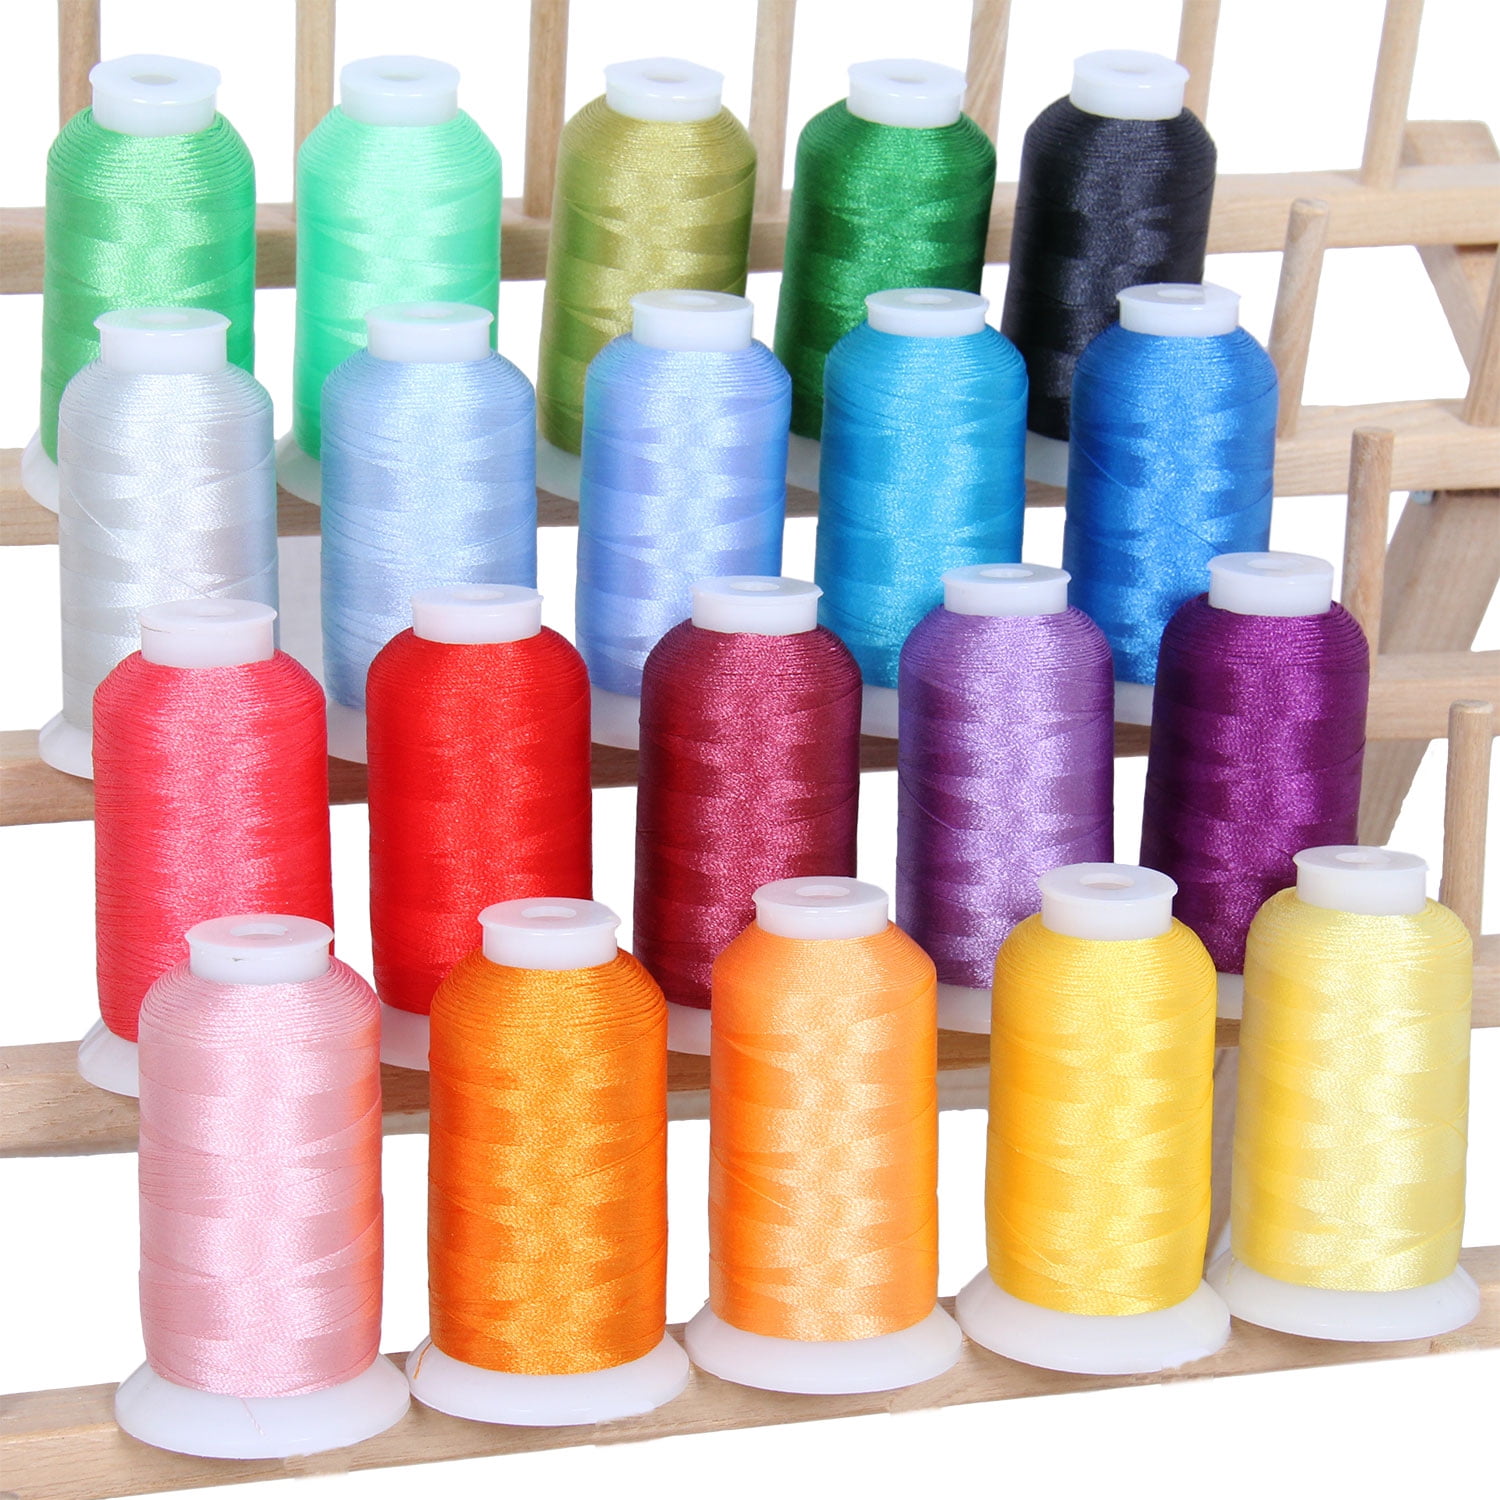 Large 1100yds Machine Metallic Embroidery Thread Set 20 Cones/spools  Assorted Colors Polyester Sewing Thread Kit Compatible with Brother  Babylock